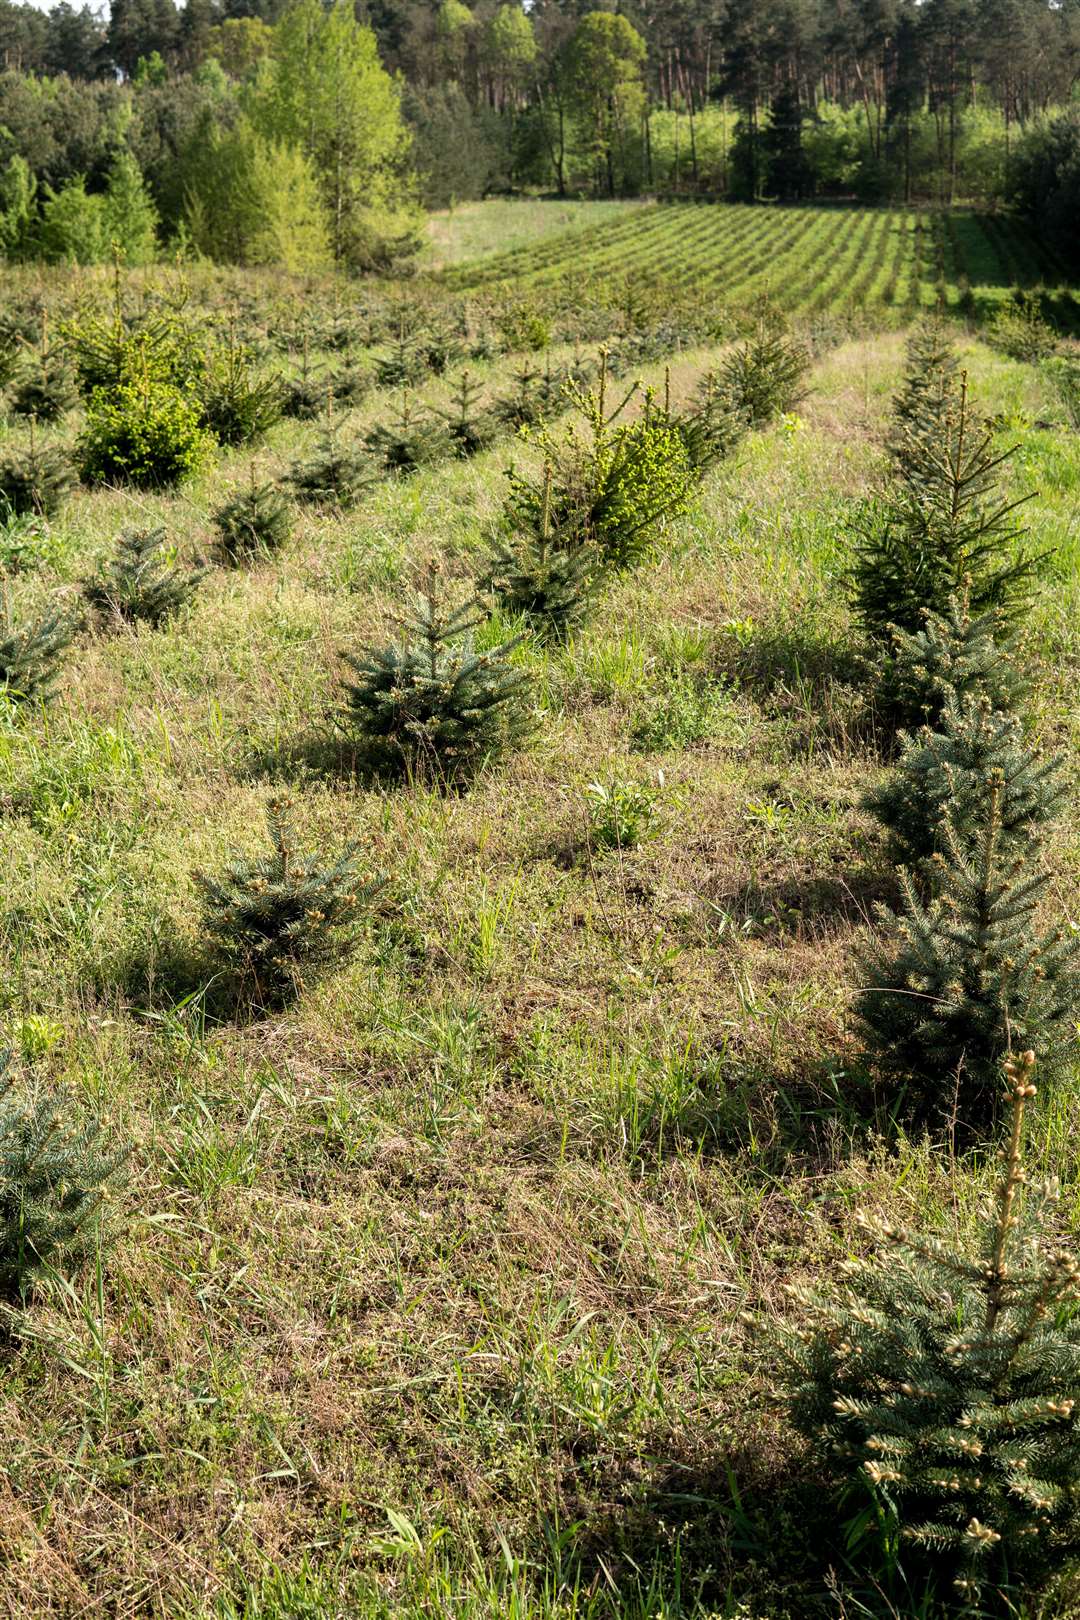 A young Christmas tree plantation. Adobe Stock Images